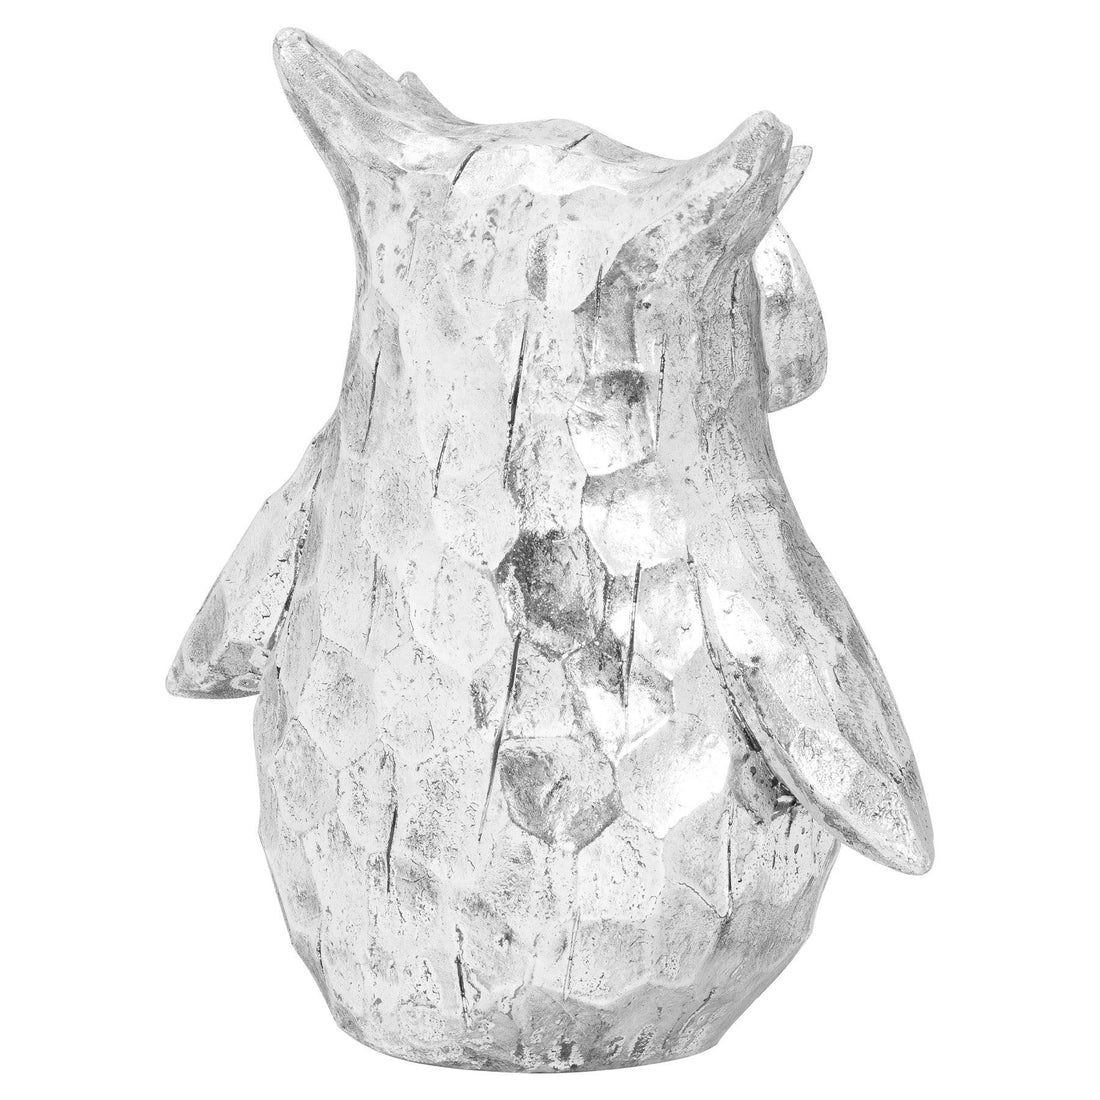 Olive The Large Silver Ceramic Owl - £39.95 - Gifts & Accessories > Ornaments > Ornaments 